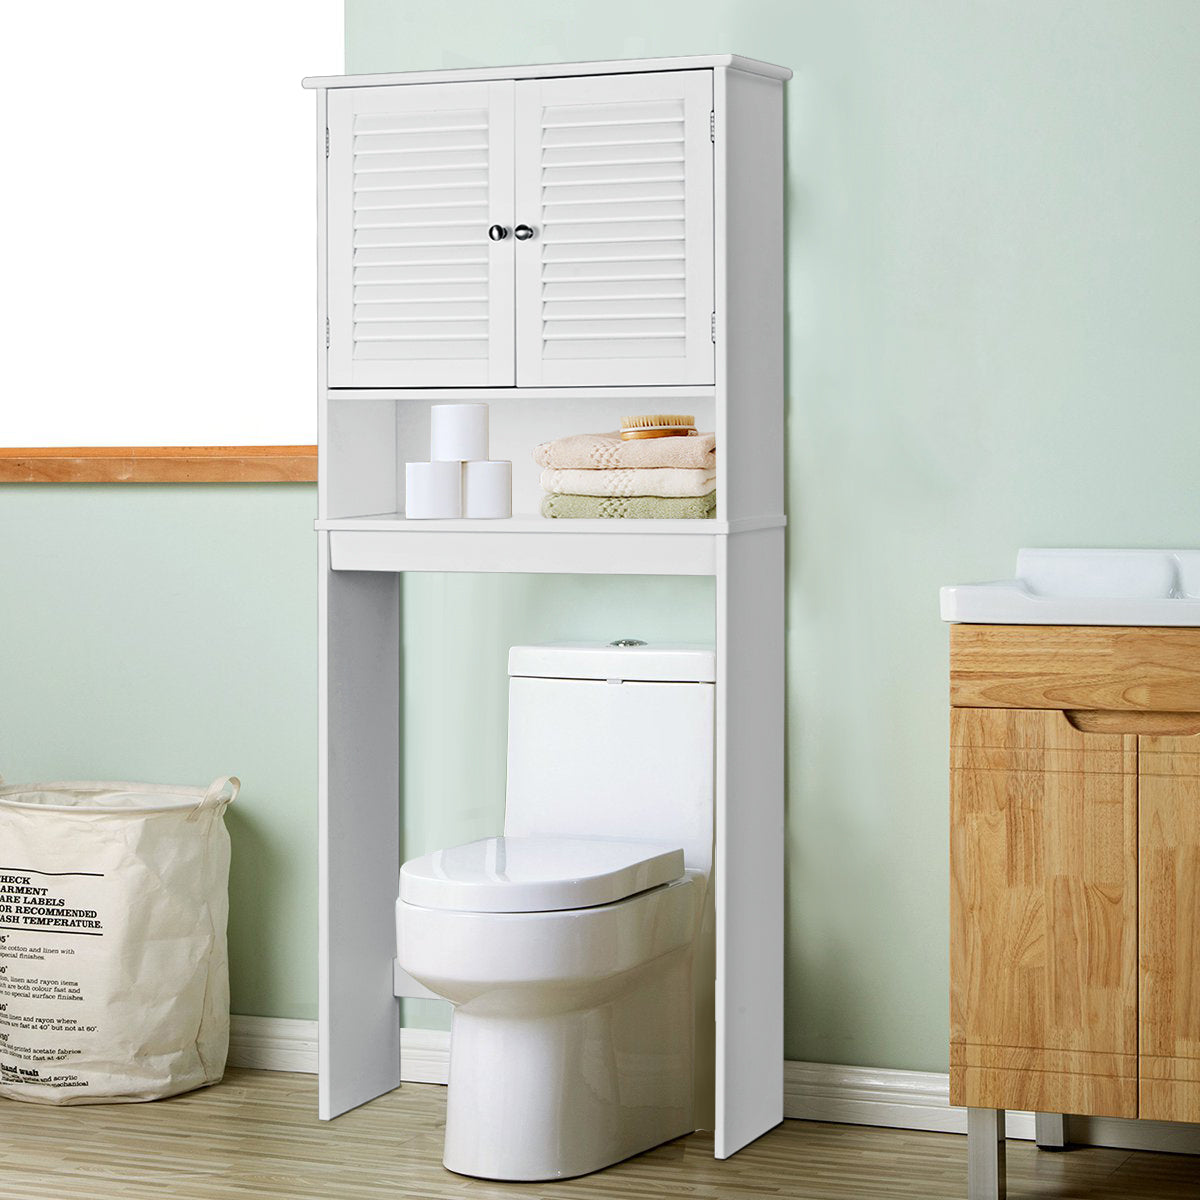 Bathroom Over-The-Toilet Space Saver Storage with Adjustable Shelf